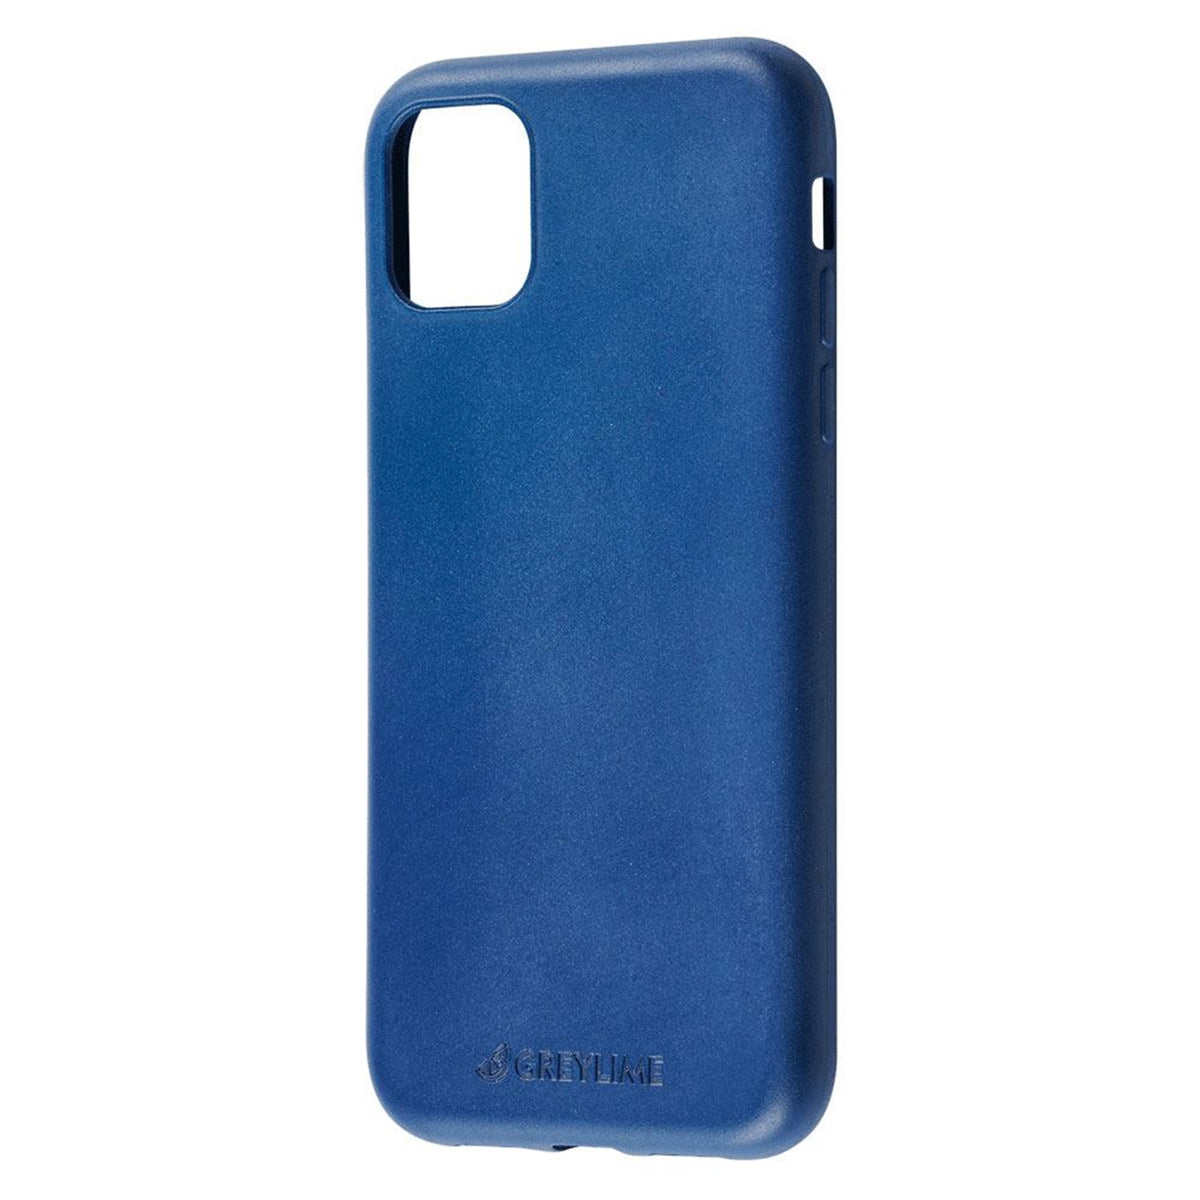 GreyLime-iPhone-11-biodegradable-cover-Navy-blue-COIP1103-V2.jpg